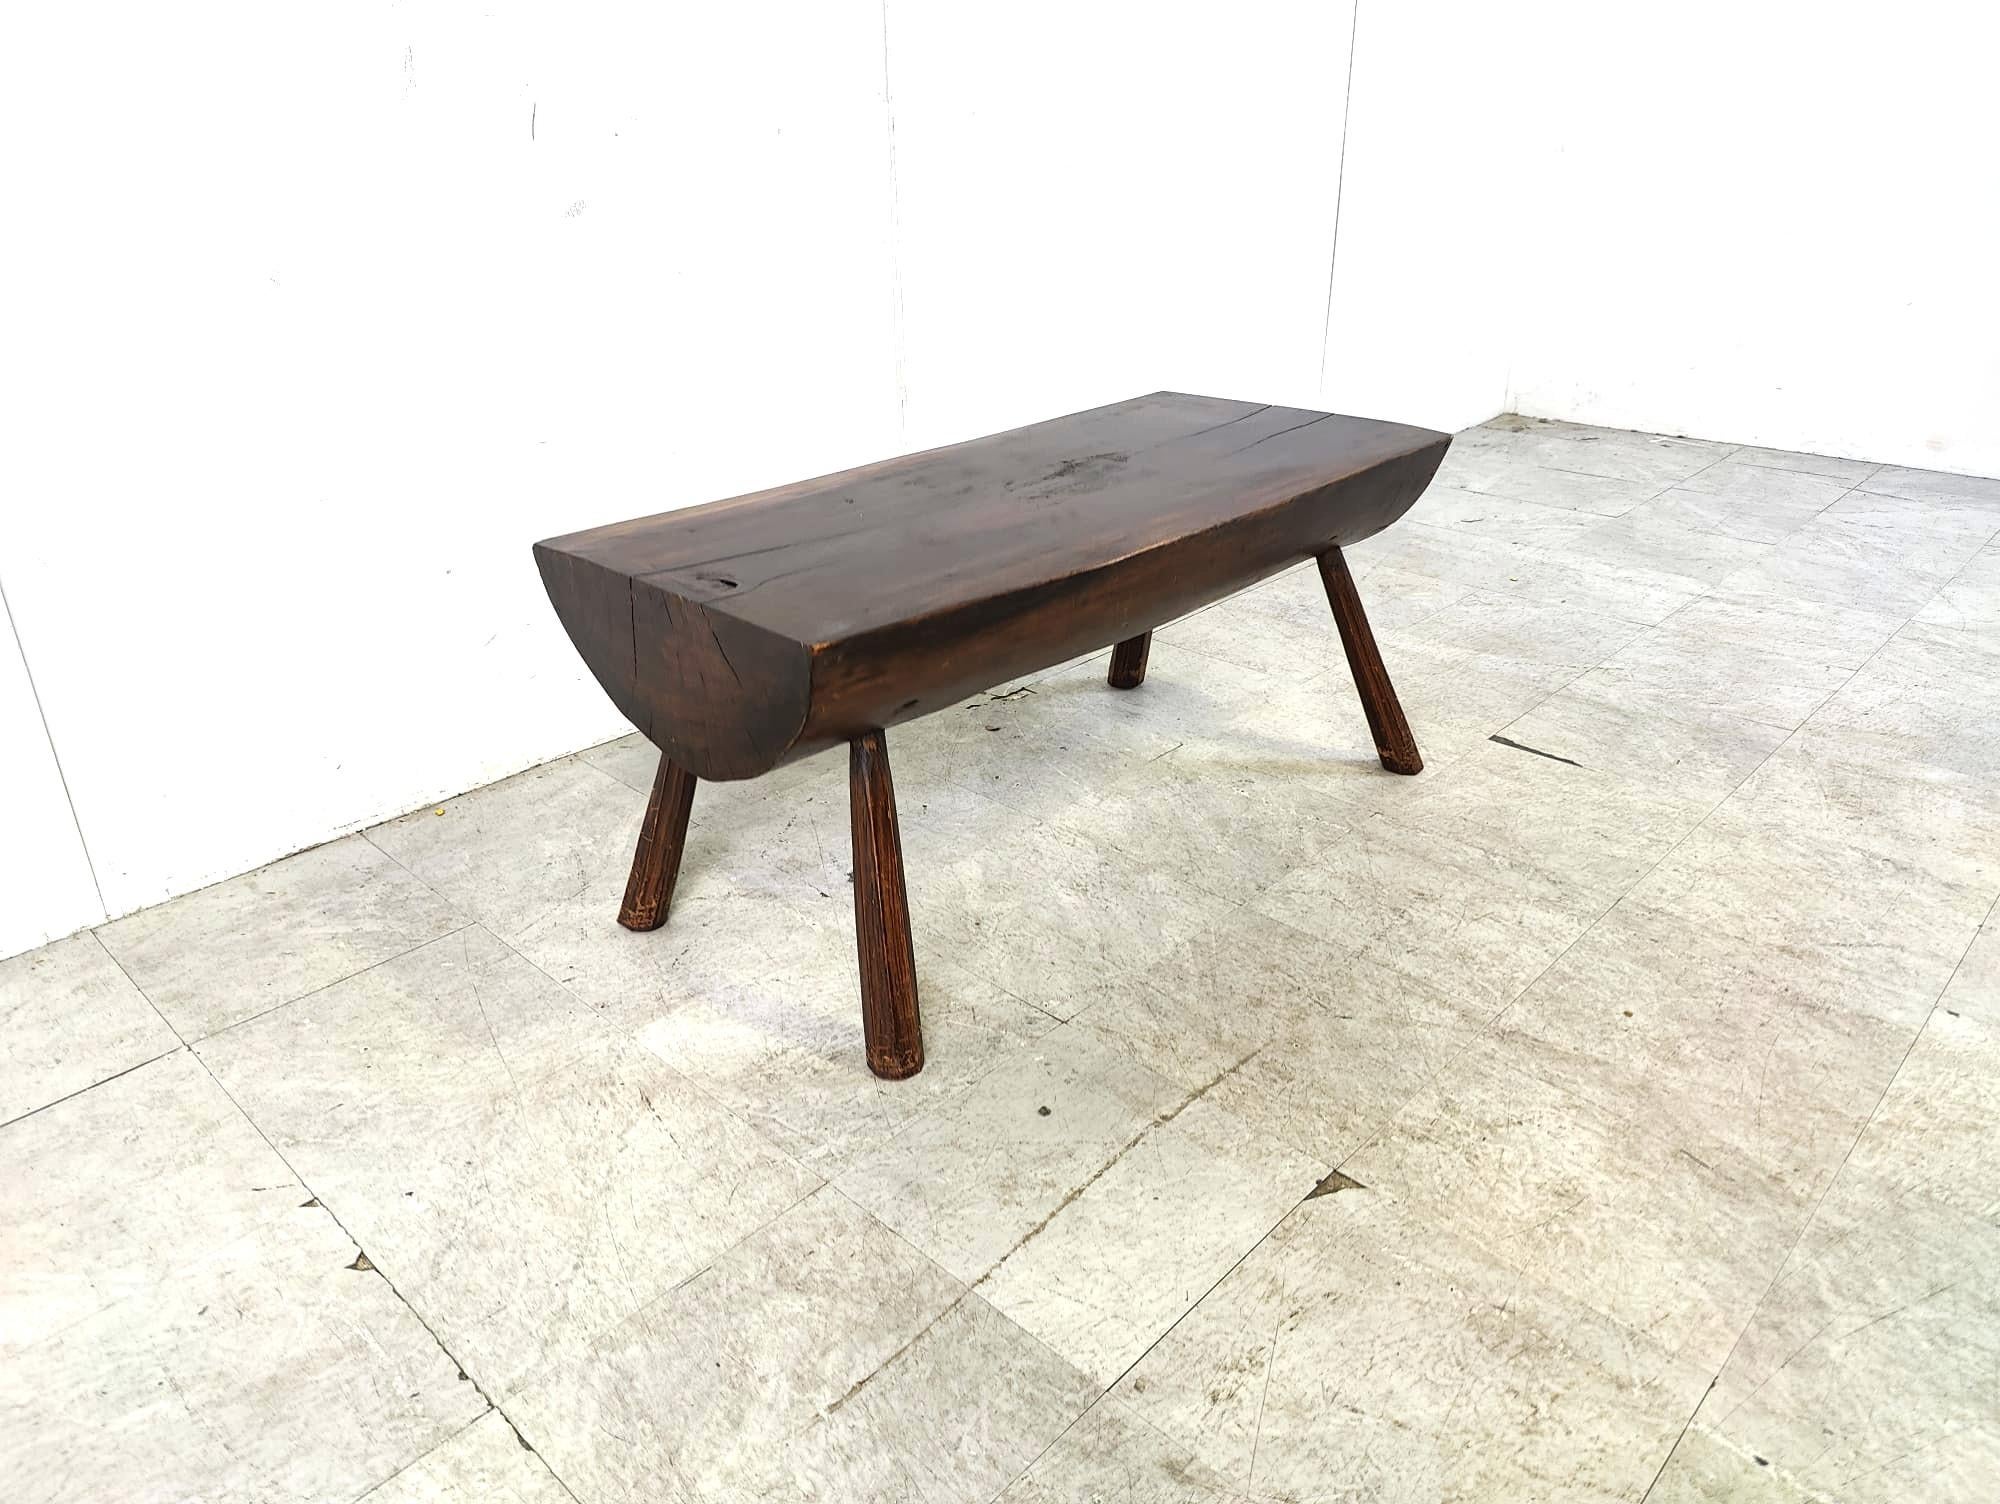 Brutalist 4 legged coffee table with a solid wooden top.

Great piece to contrast modern day interiros.

Charming patina.

1960s - Belgium

Dimensions:
Height: 45cm
Width: 100cm
Depth: 45cm

Ref.: 714916
